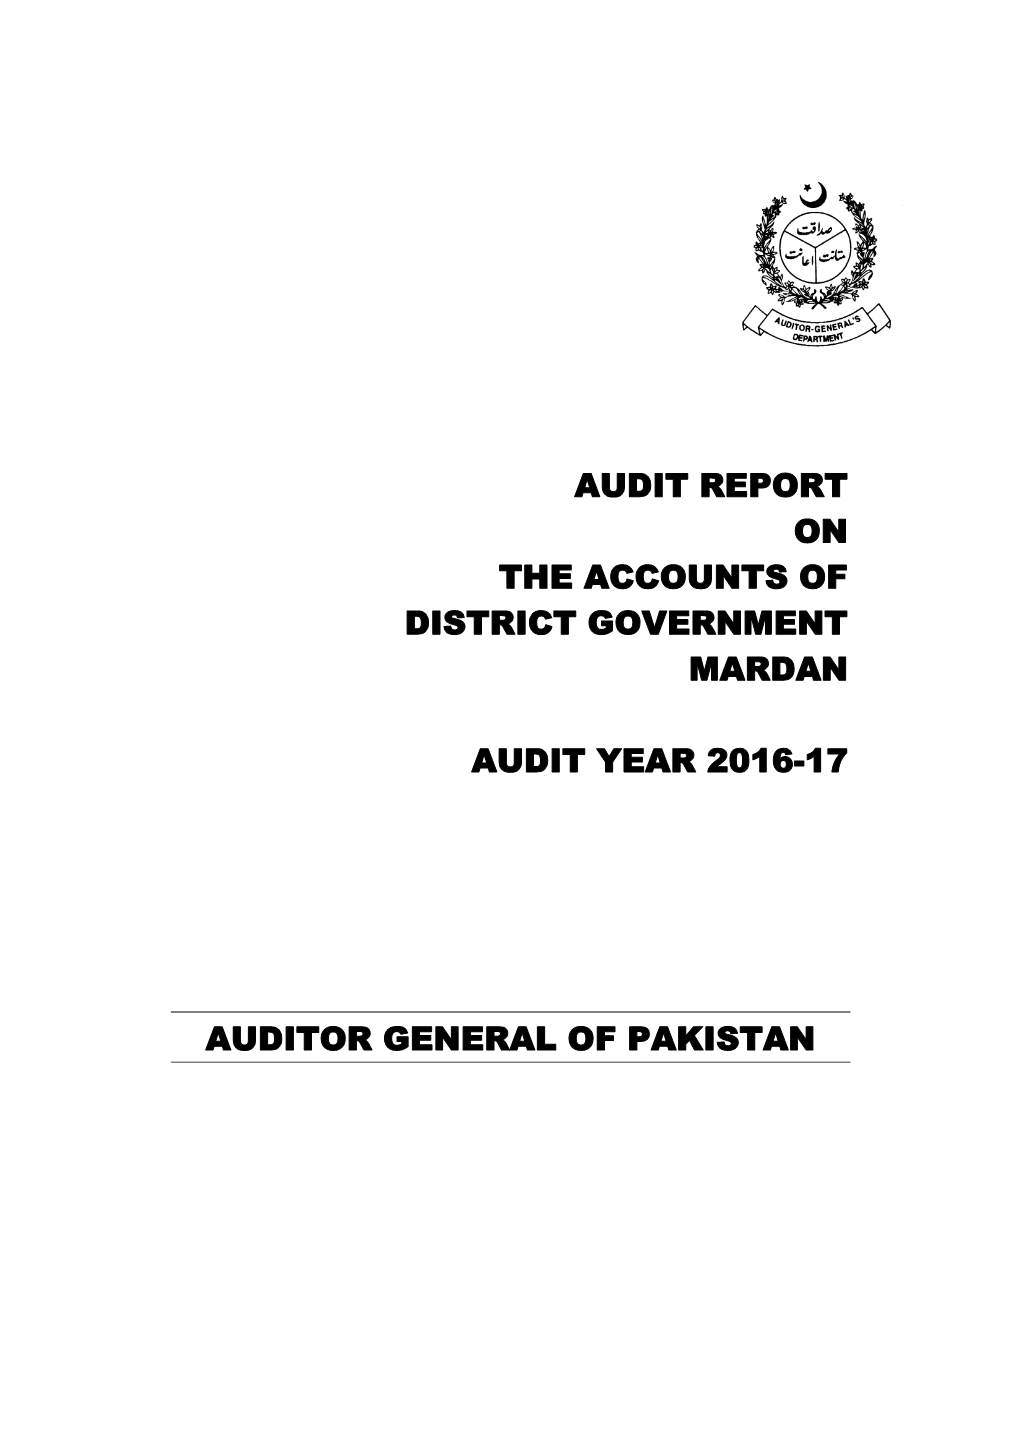 Audit Report on the Accounts of District Government Mardan